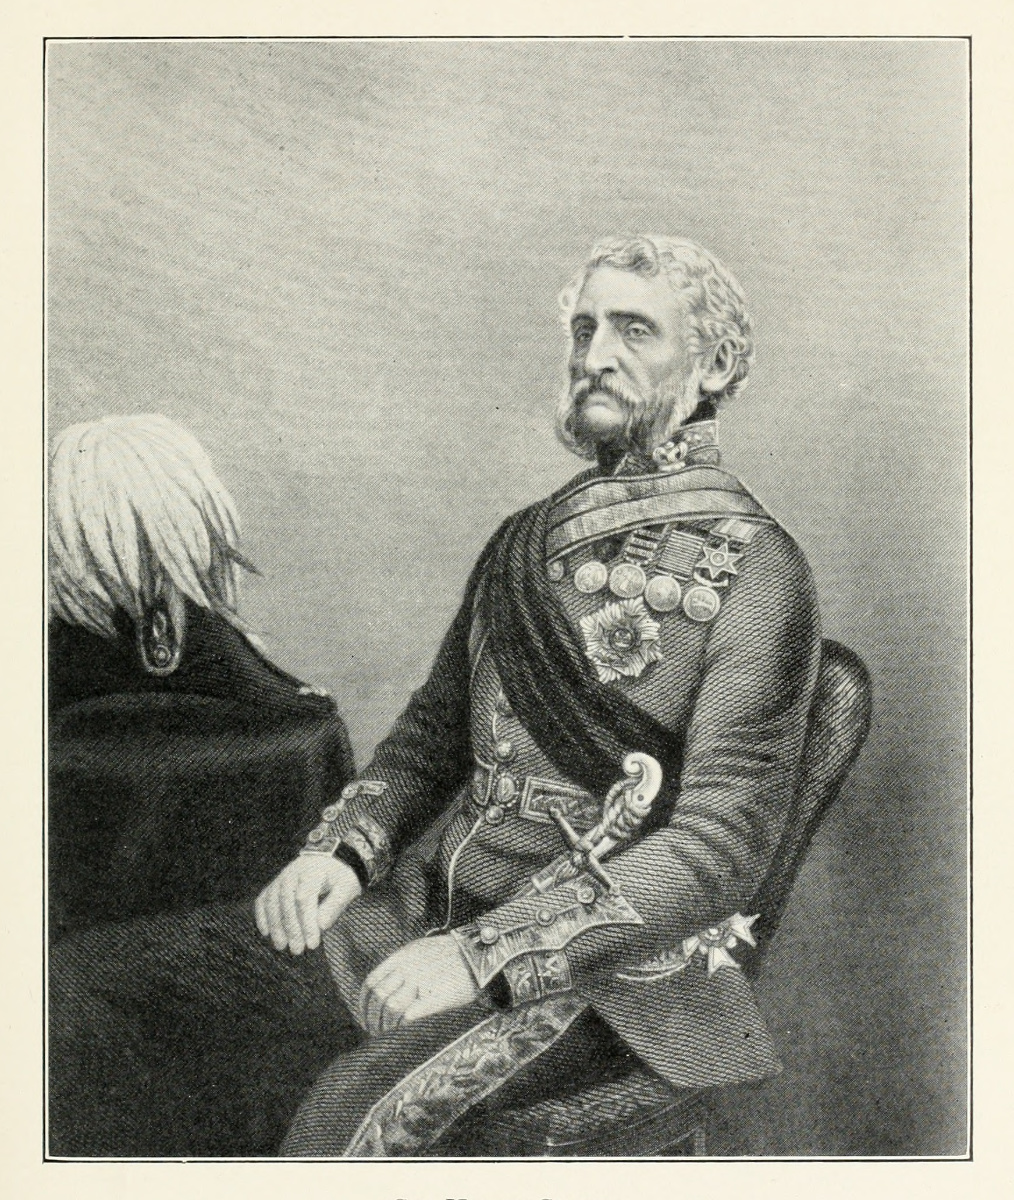 Portrait of Sir Harry Smith. Illustration from Geo. E. Cory, The Rise of South Africa: A History of the Origin of South African Colonisation and its Development Towards the East from the Earliest Times to 1857, 6 vols (London: Longmans, Green and Co., 1930), 5:opposite 98. Courtesy of the Internet Archive (https://archive.org/details/riseofsouthafric05coryuoft).